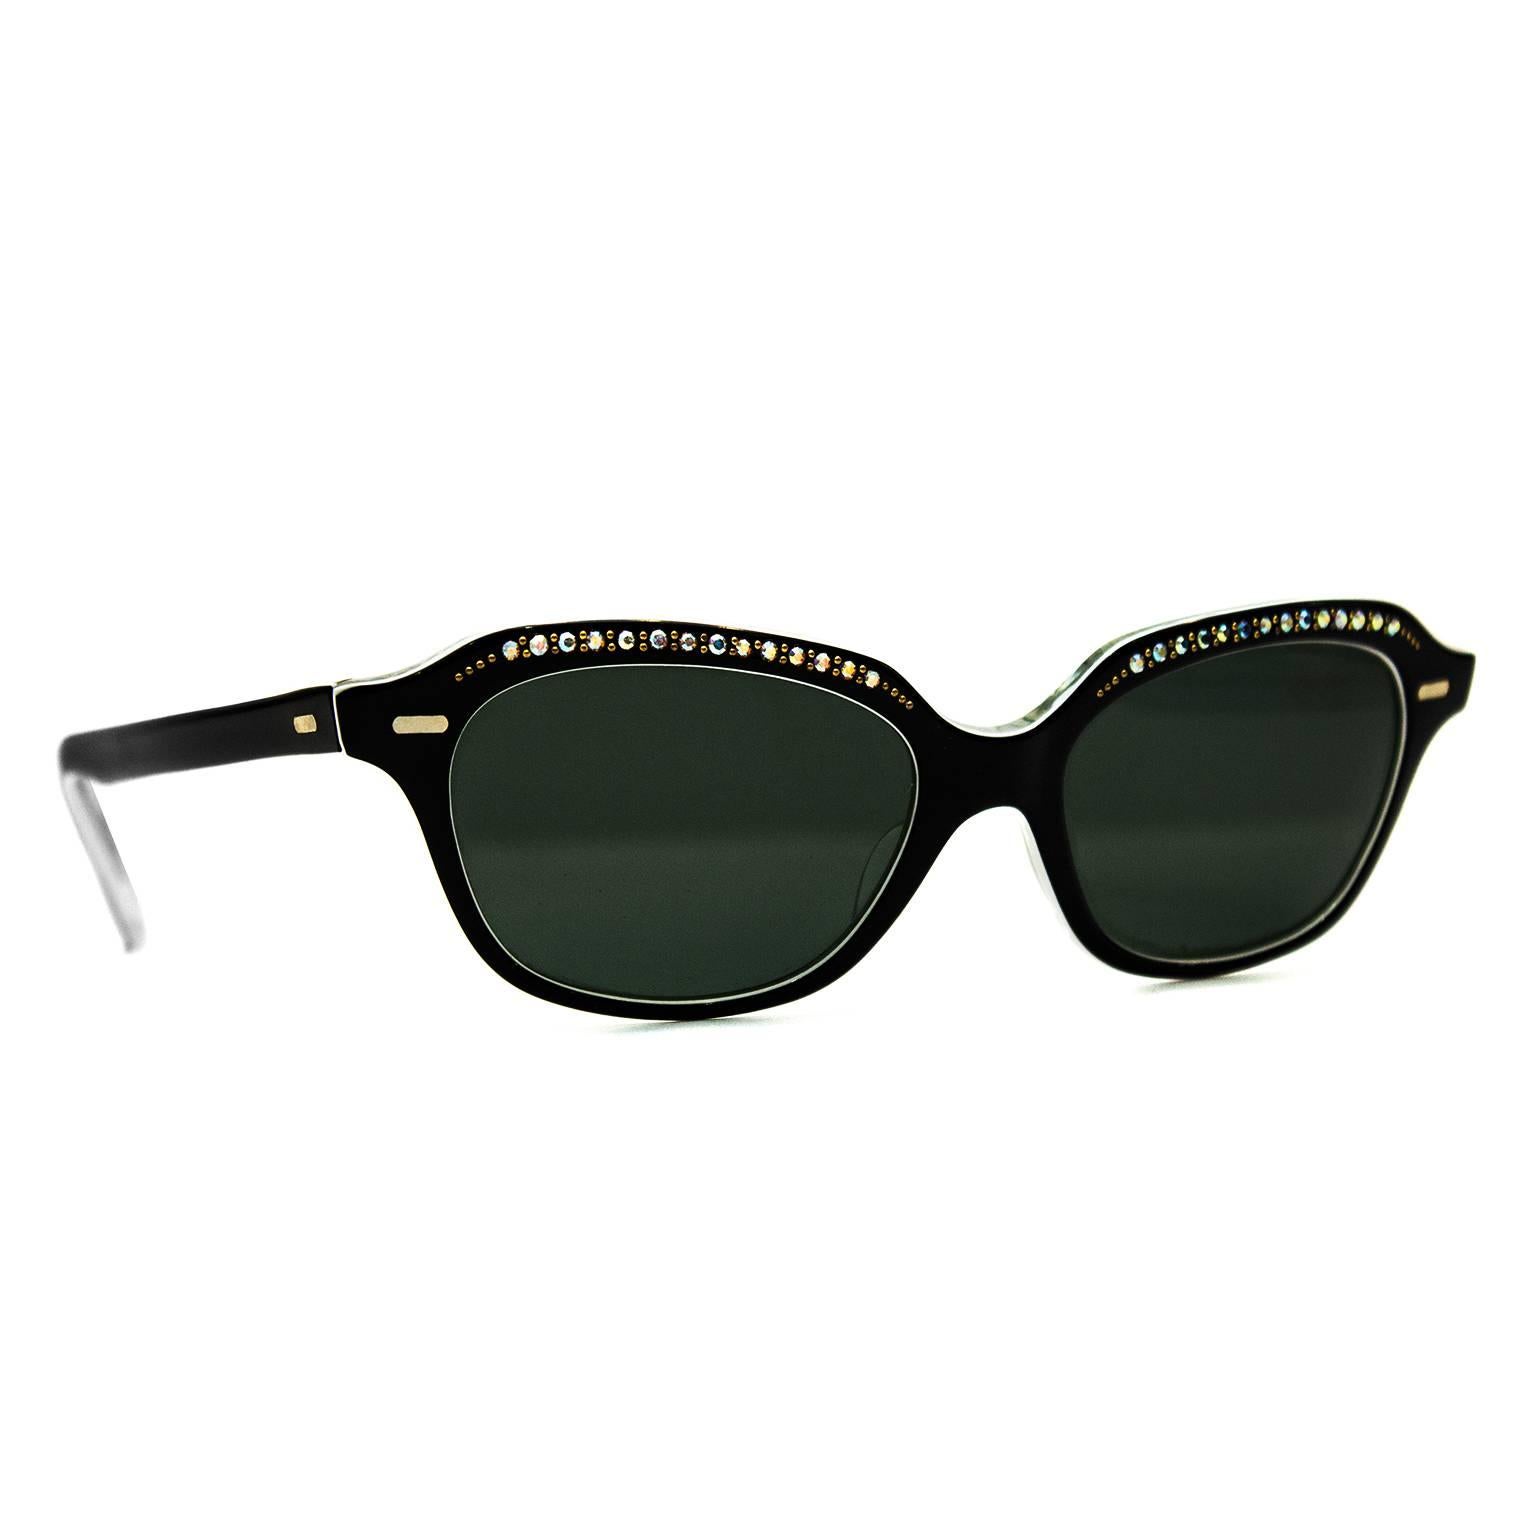 1950's Sun Rite sunglasses. Black resin embellished with tiny gold beads and iridescent rhinestones. Black/green lens. Very beautiful, excellent vintage condition. No box or case included. 